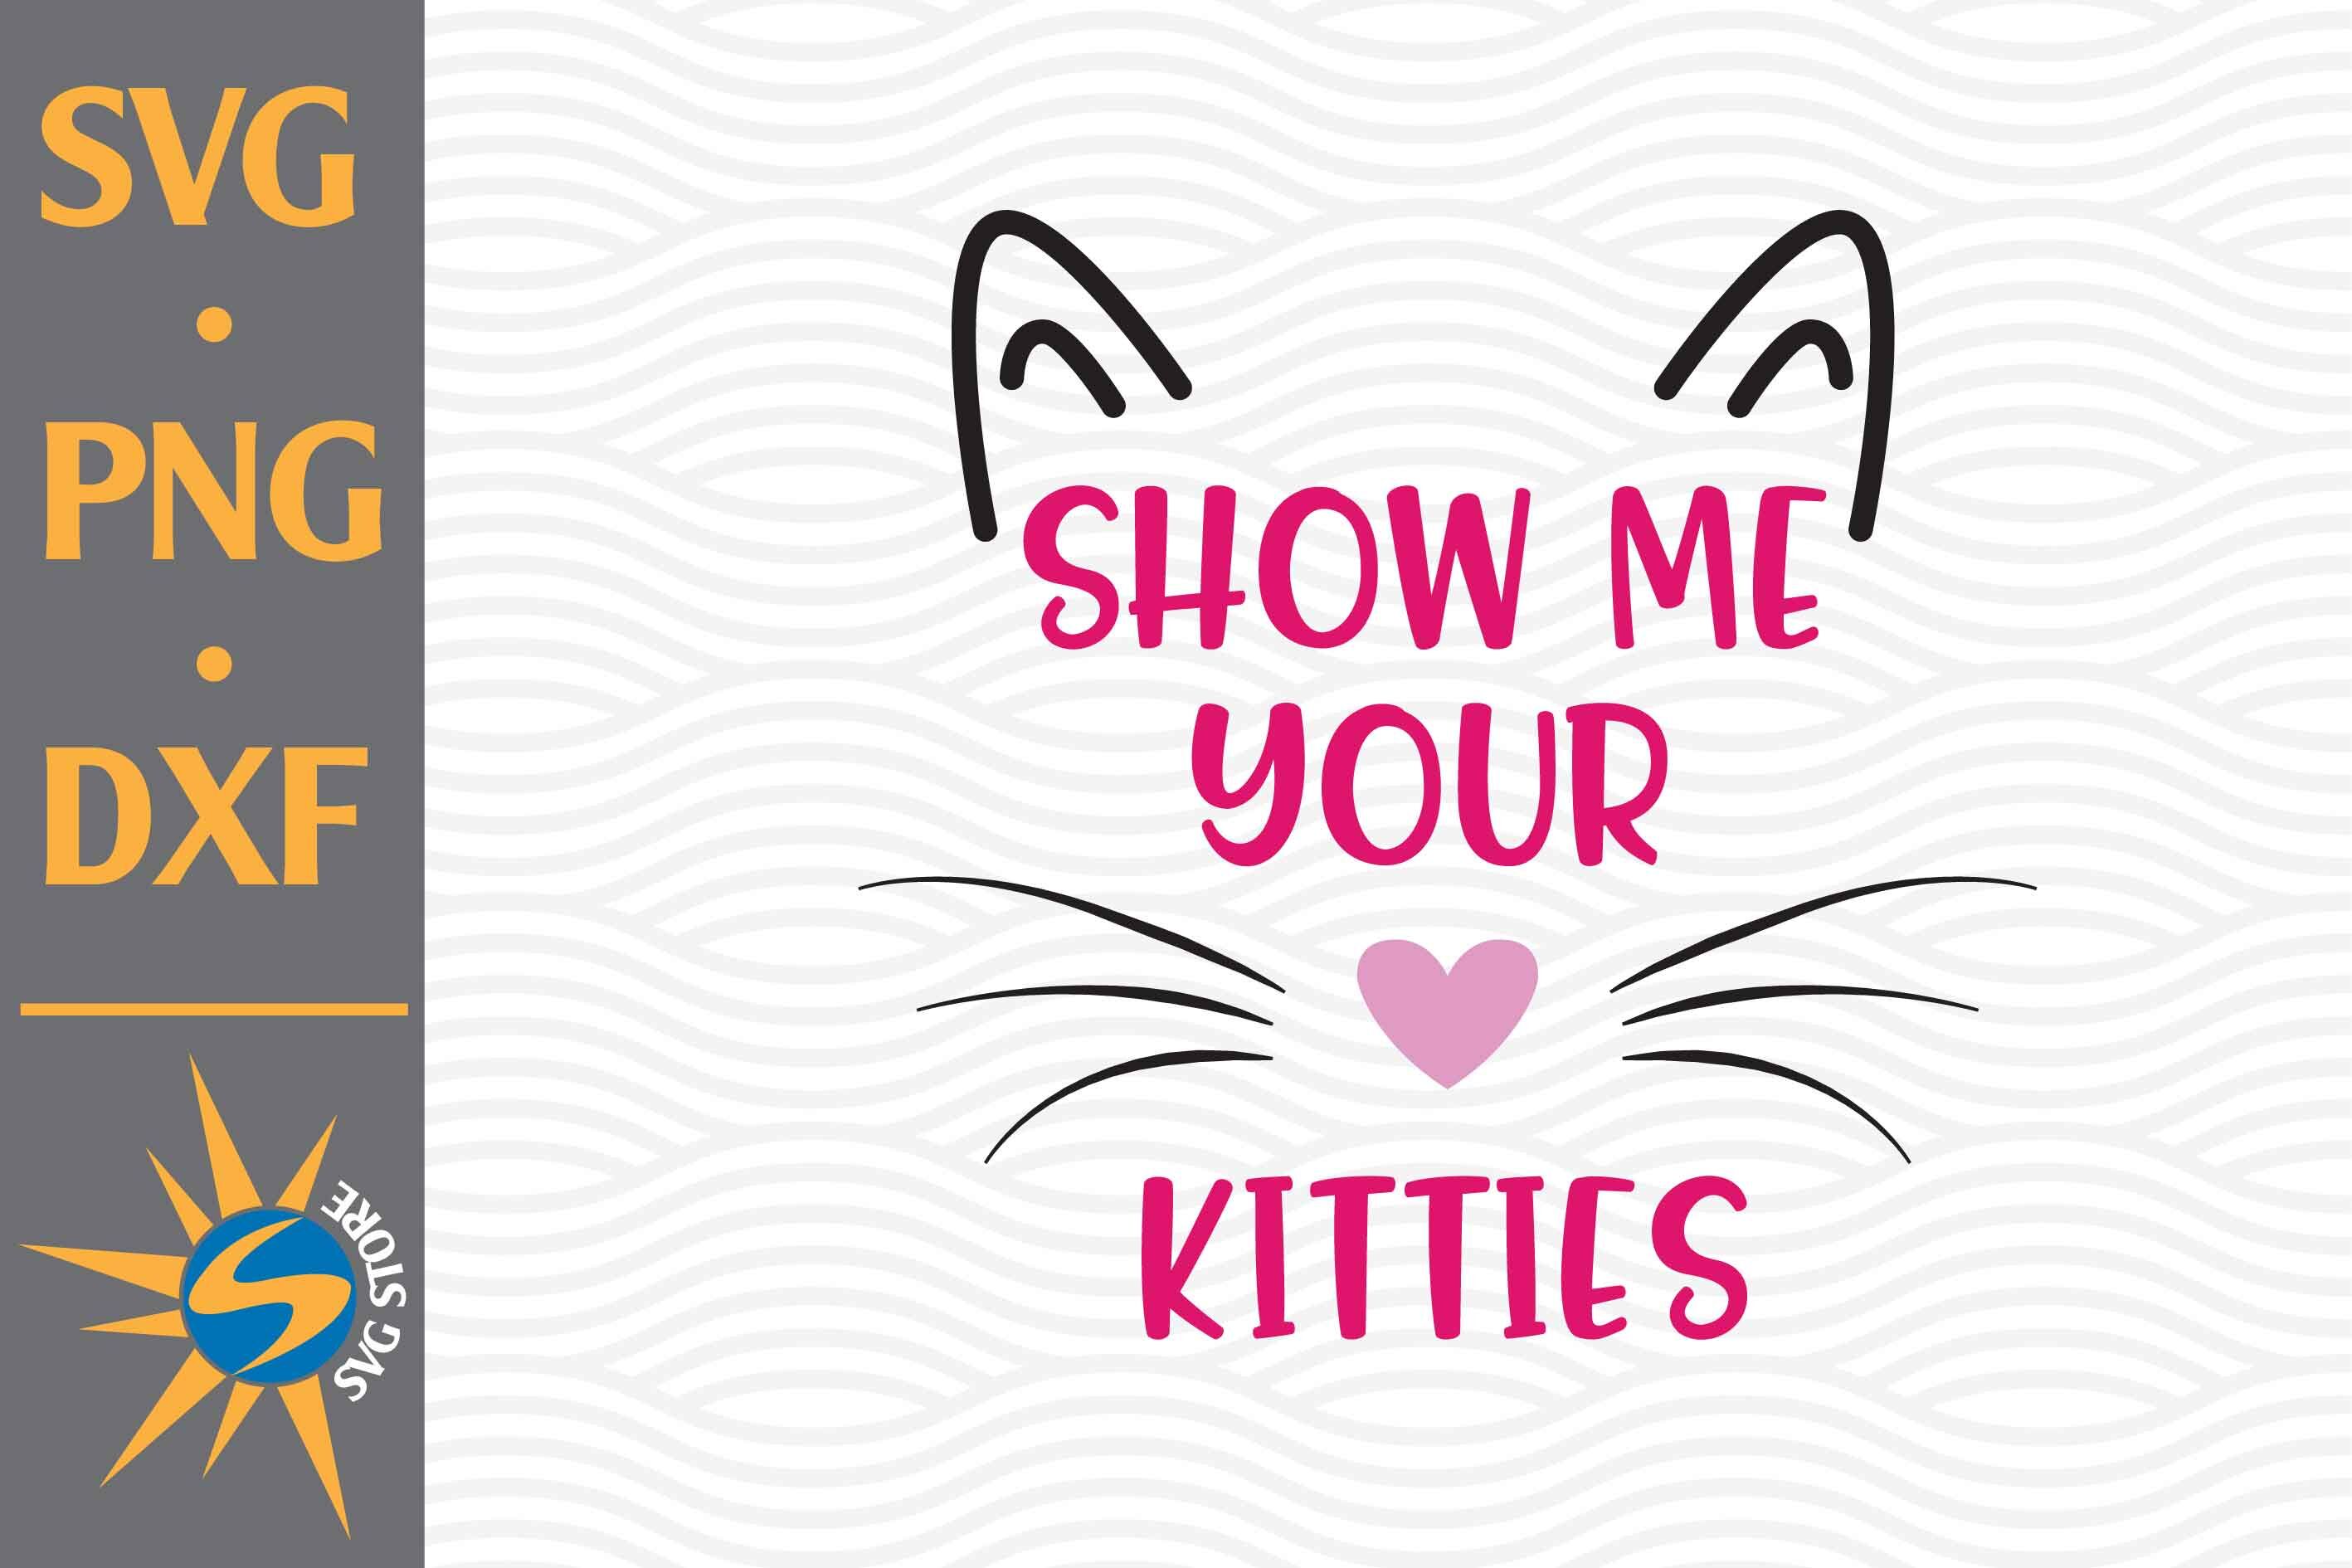 Show me Your Kitties SVG, PNG, DXF Digital Files Include By